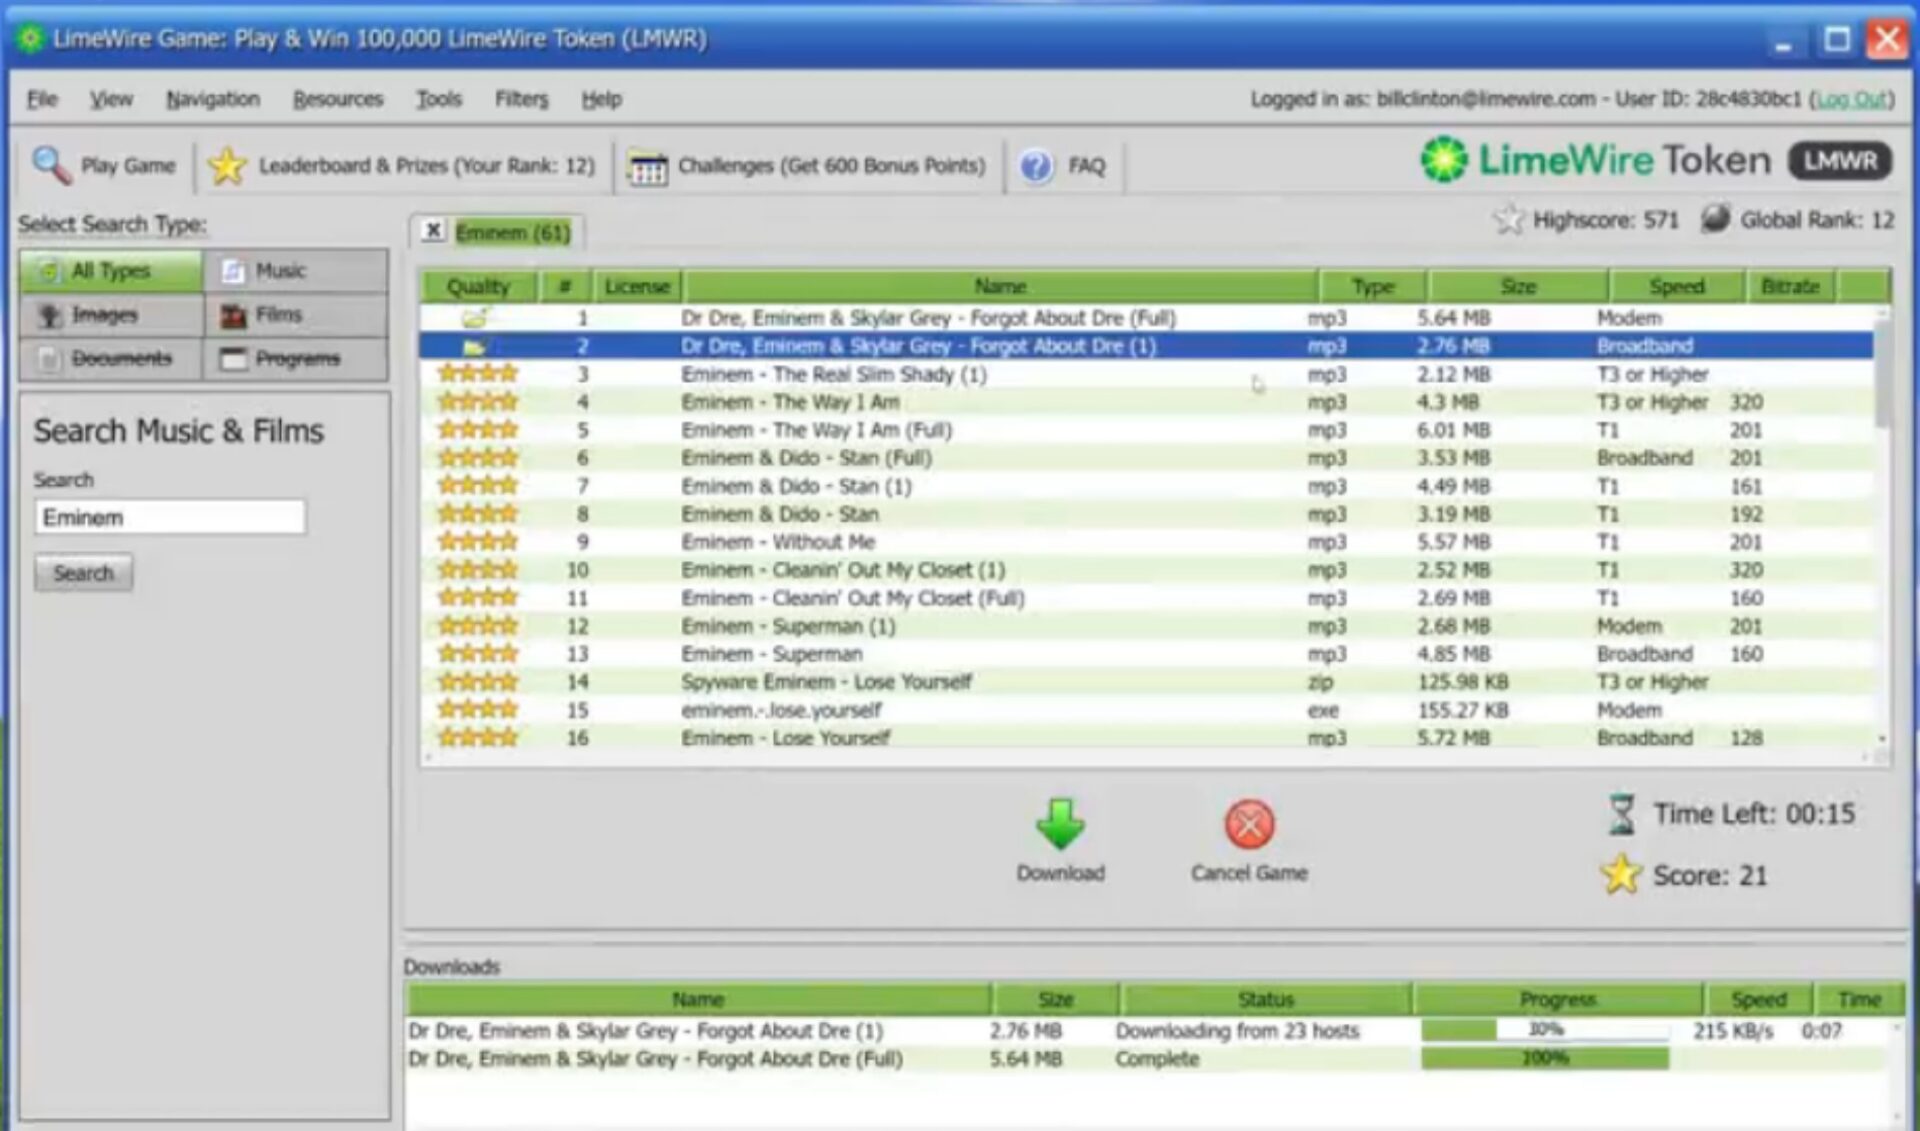 The new, NFT-focused version of LimeWire has raised $17.5 million through a token sale